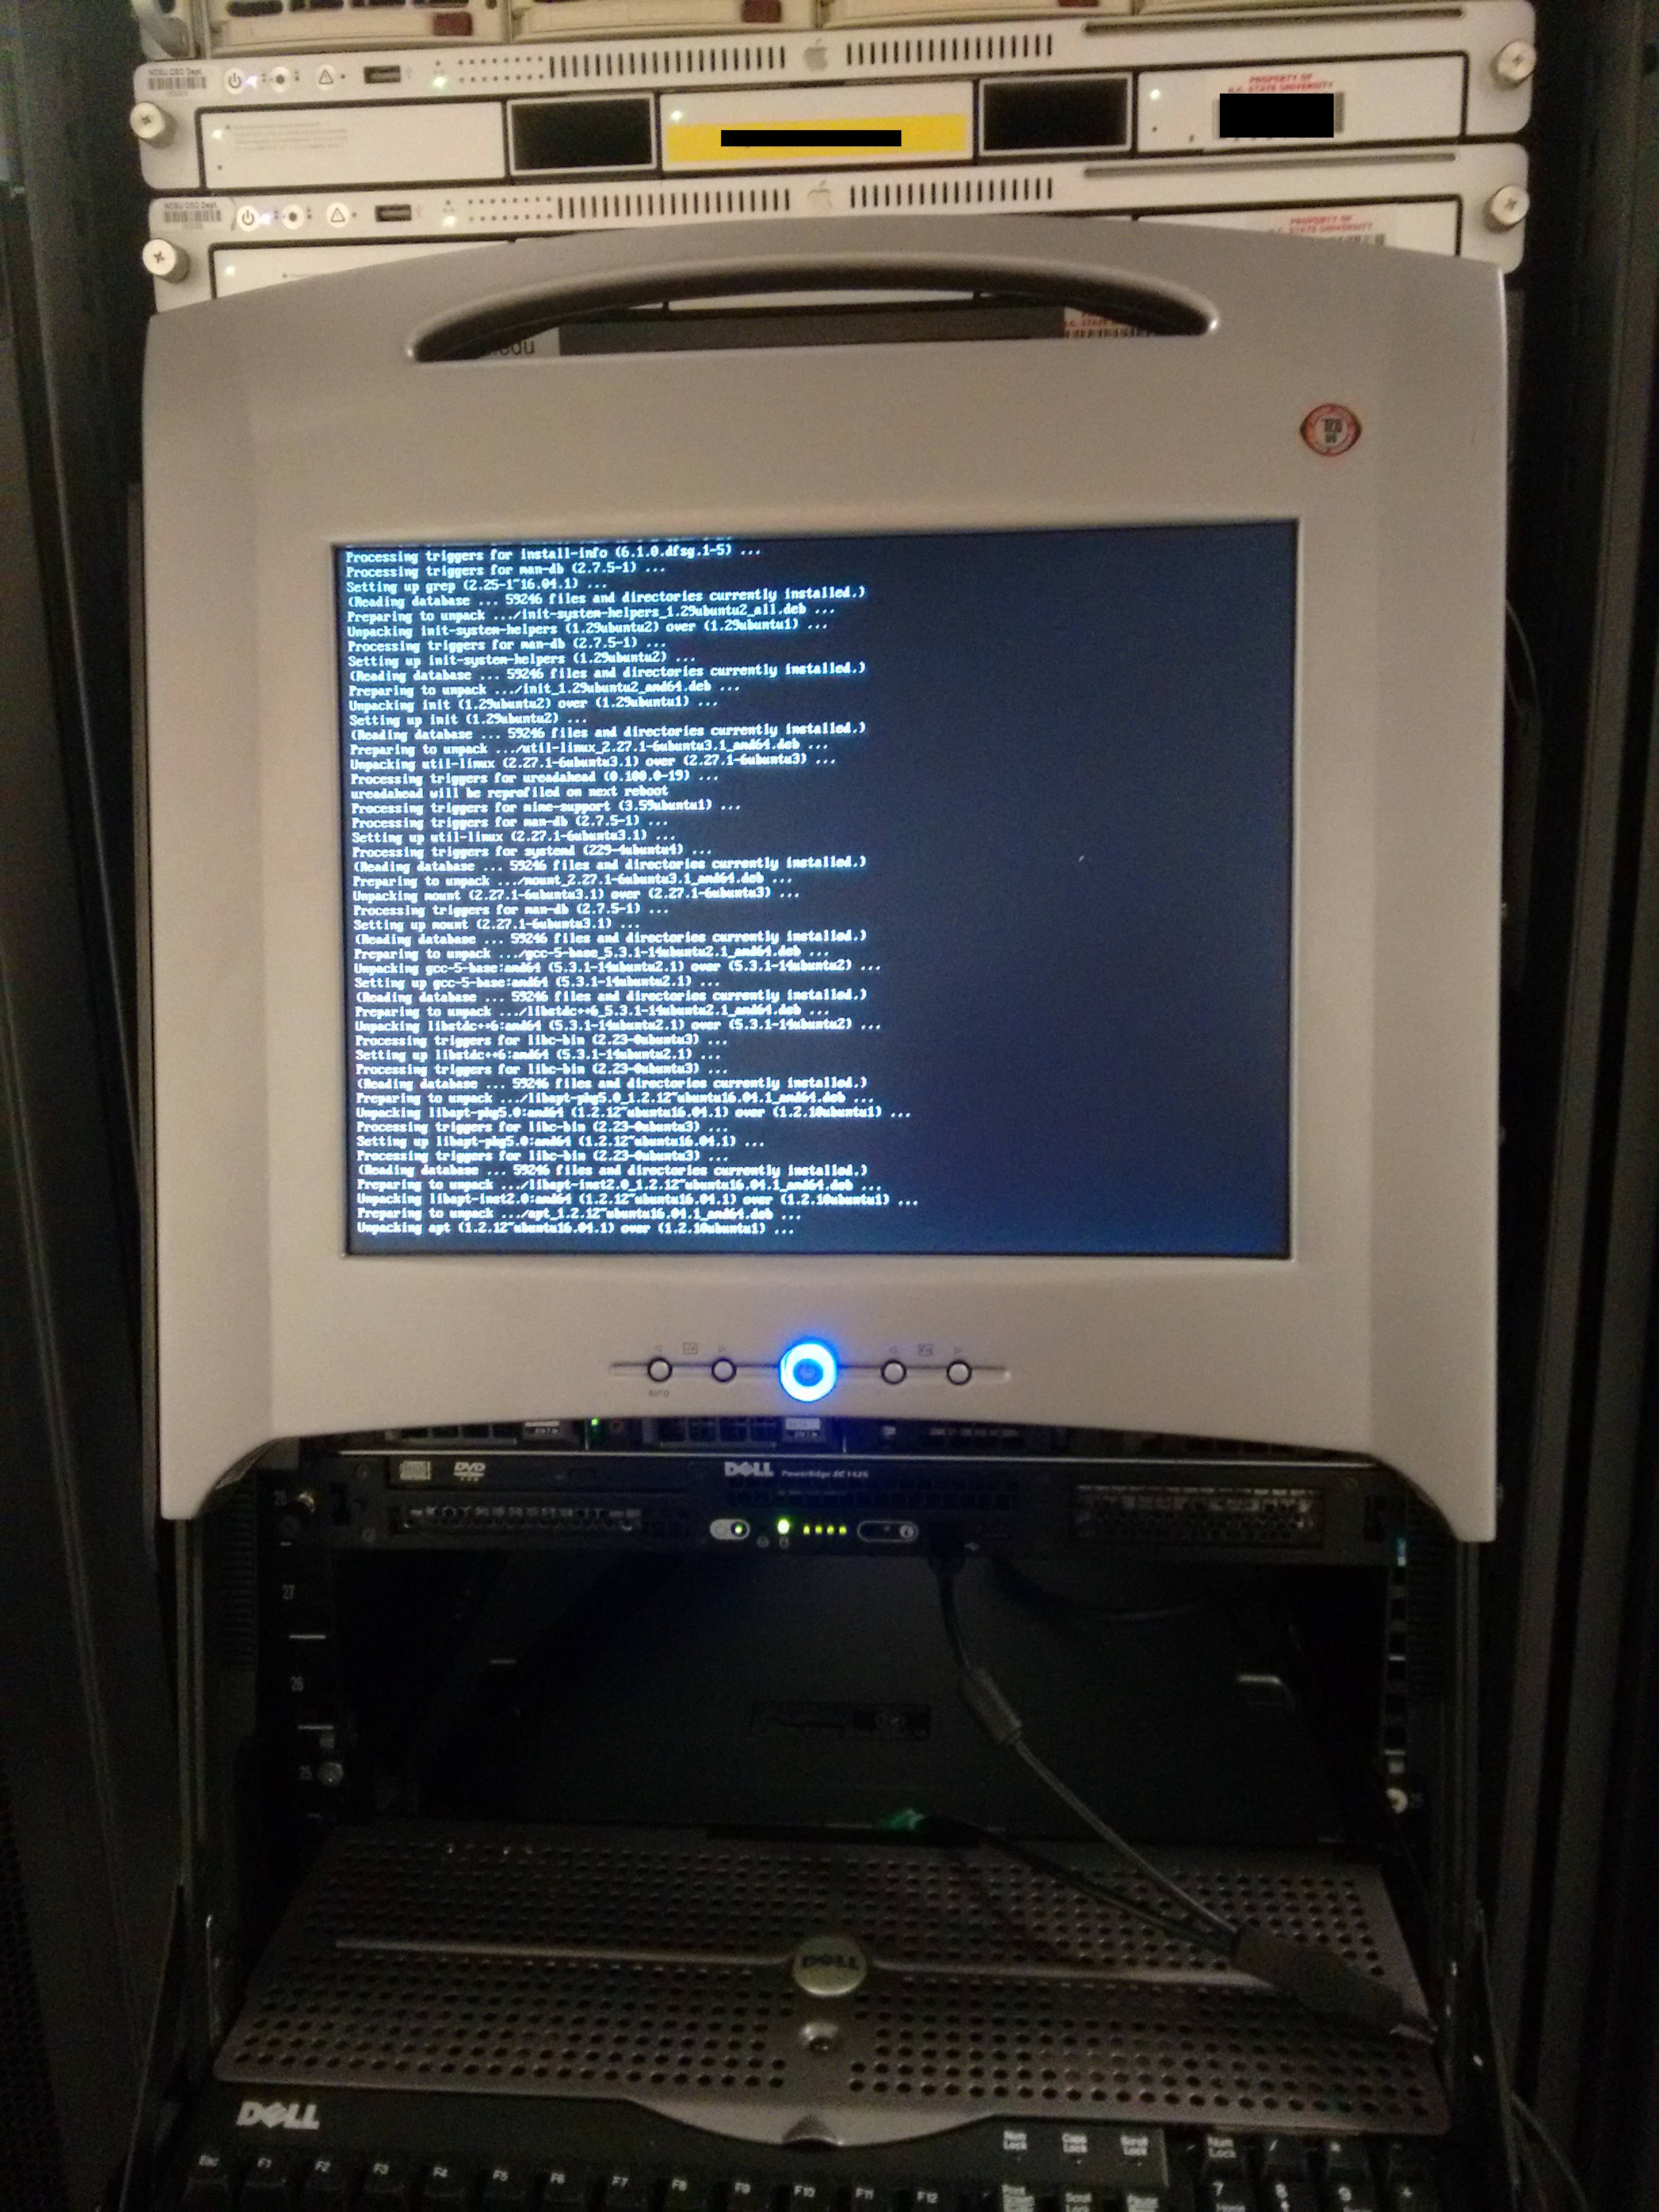 server console connected to char mounted in rack showing progress of the
installation of base system packages